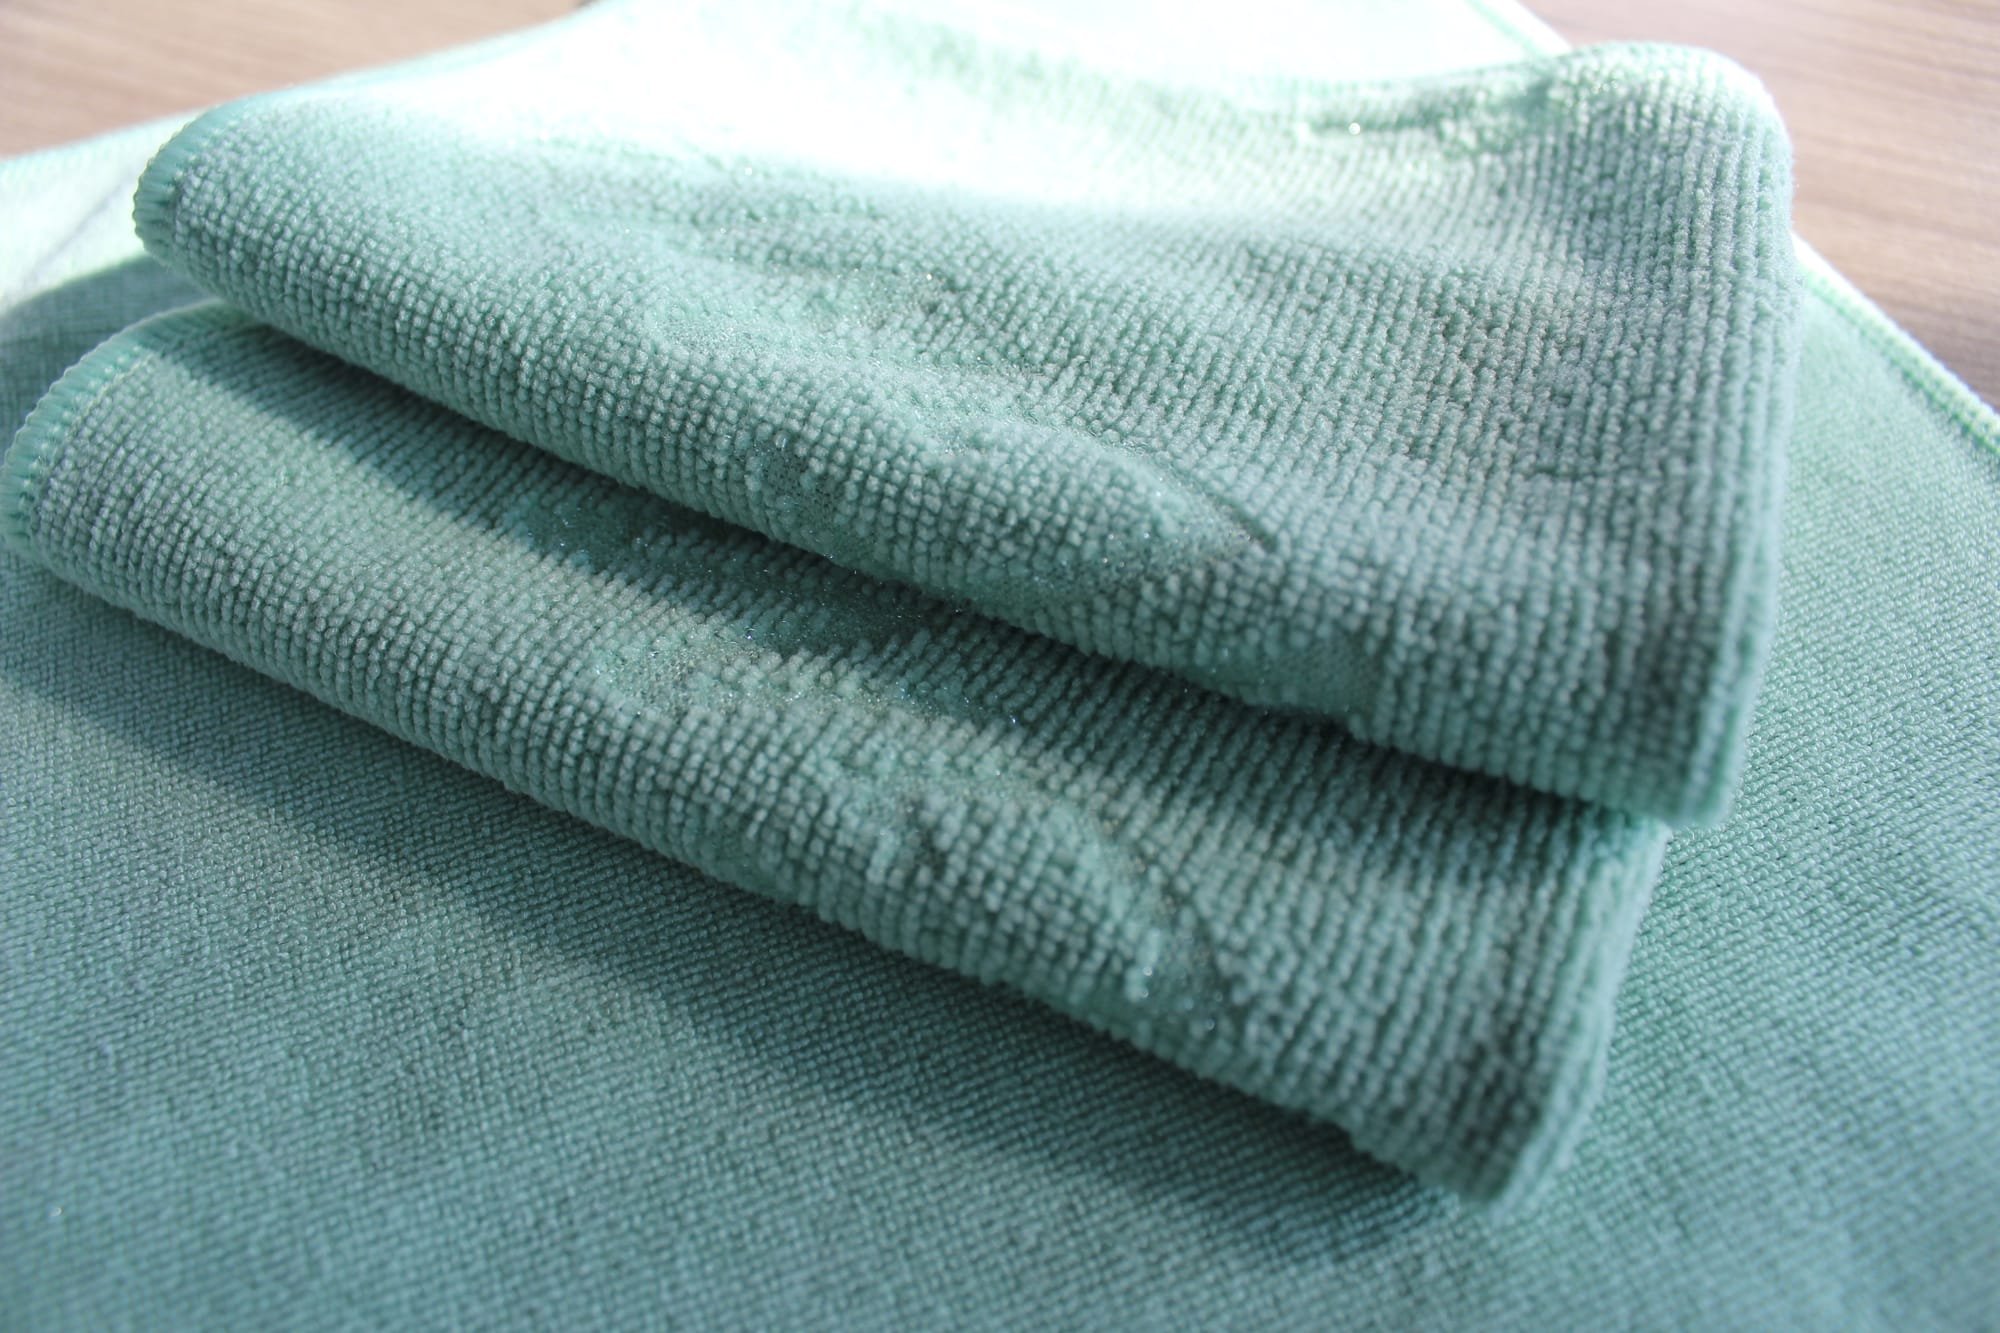 Shiny microfiber stretch towel with different colors